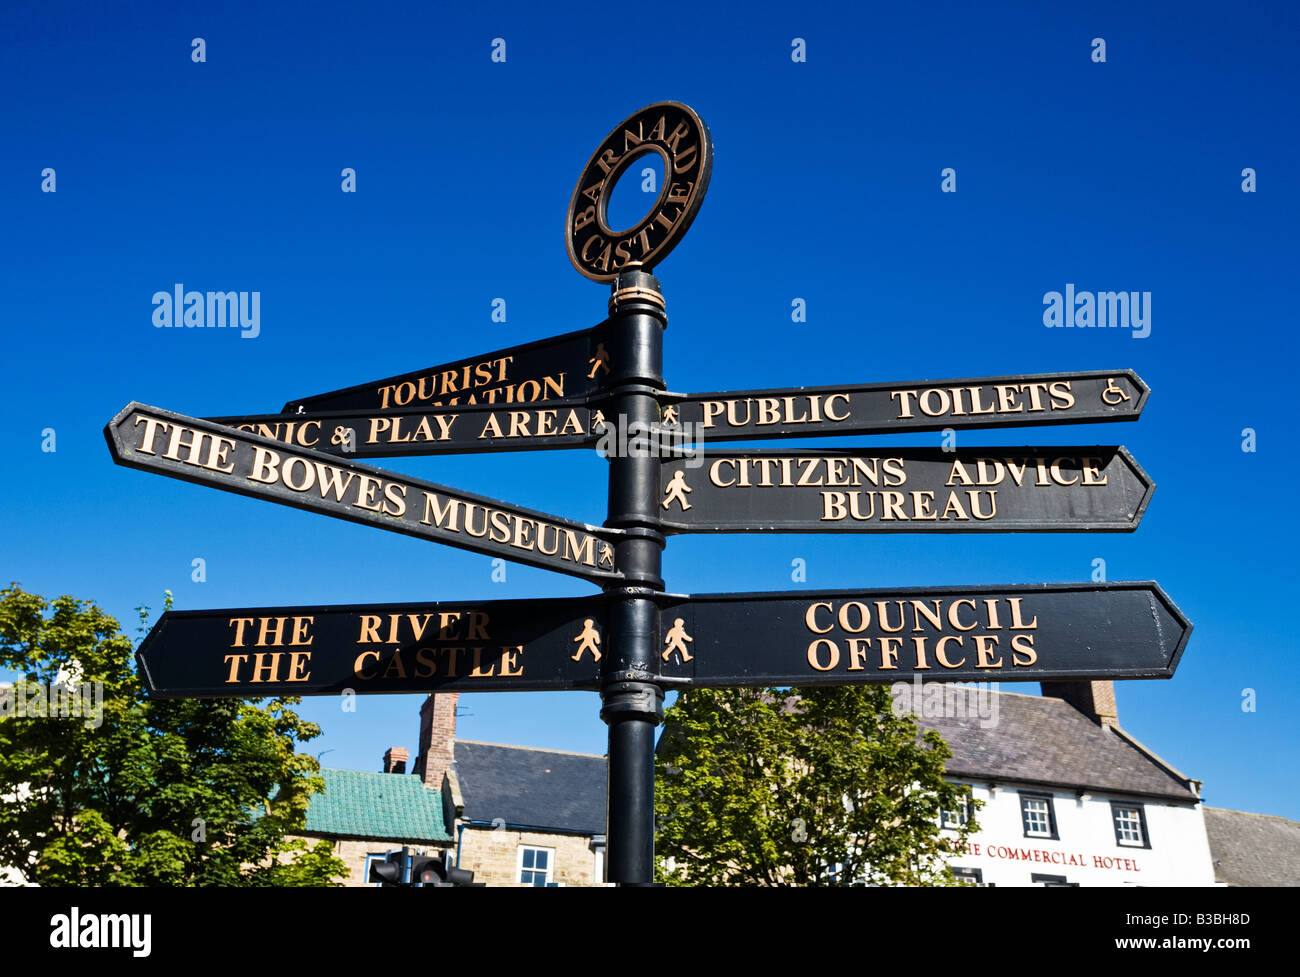 Tourist information signpost in Barnard Castle, Teesdale, County Durham, England, UK Stock Photo